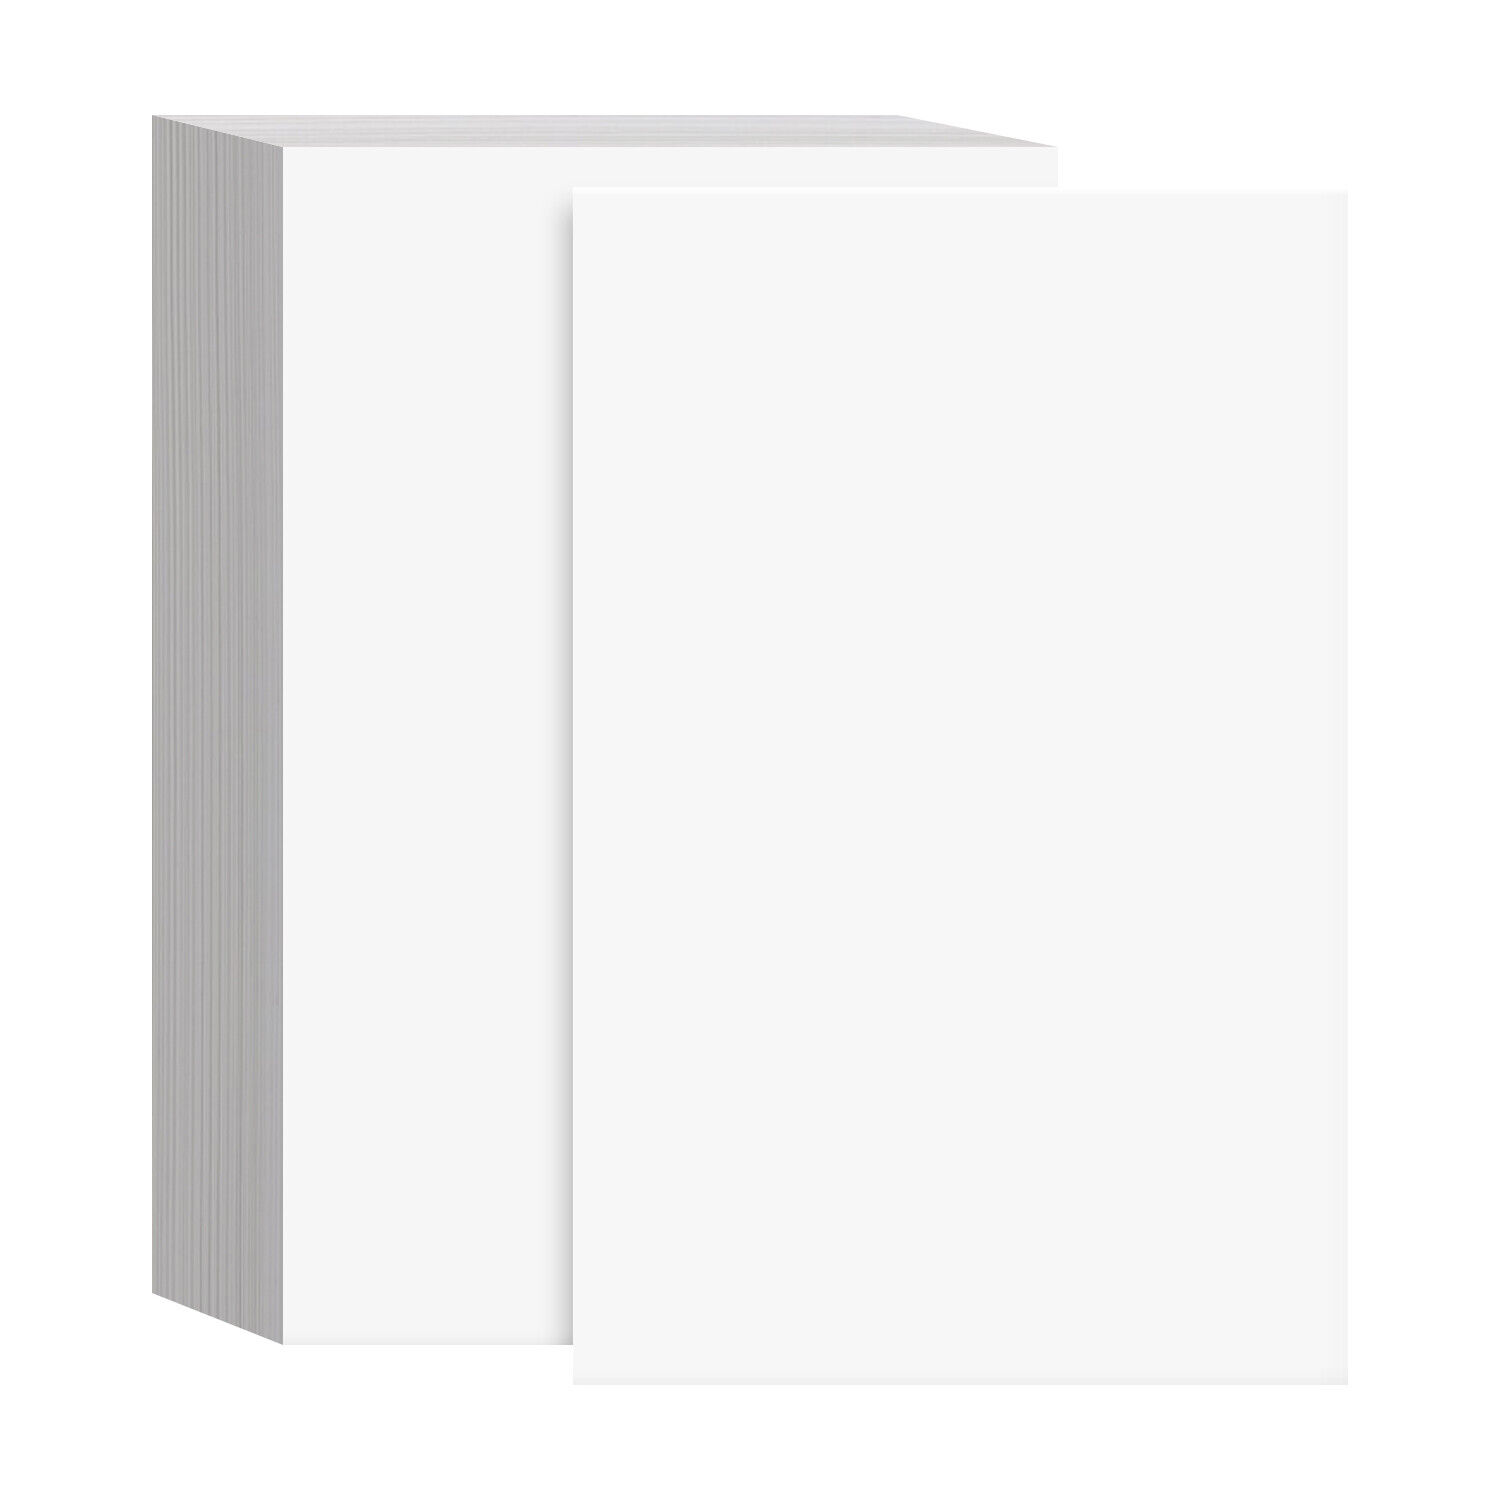 8.5 X 5.5 Bright White Card Stock - 65lb Cover - Half Letter Size - 100 Sheets